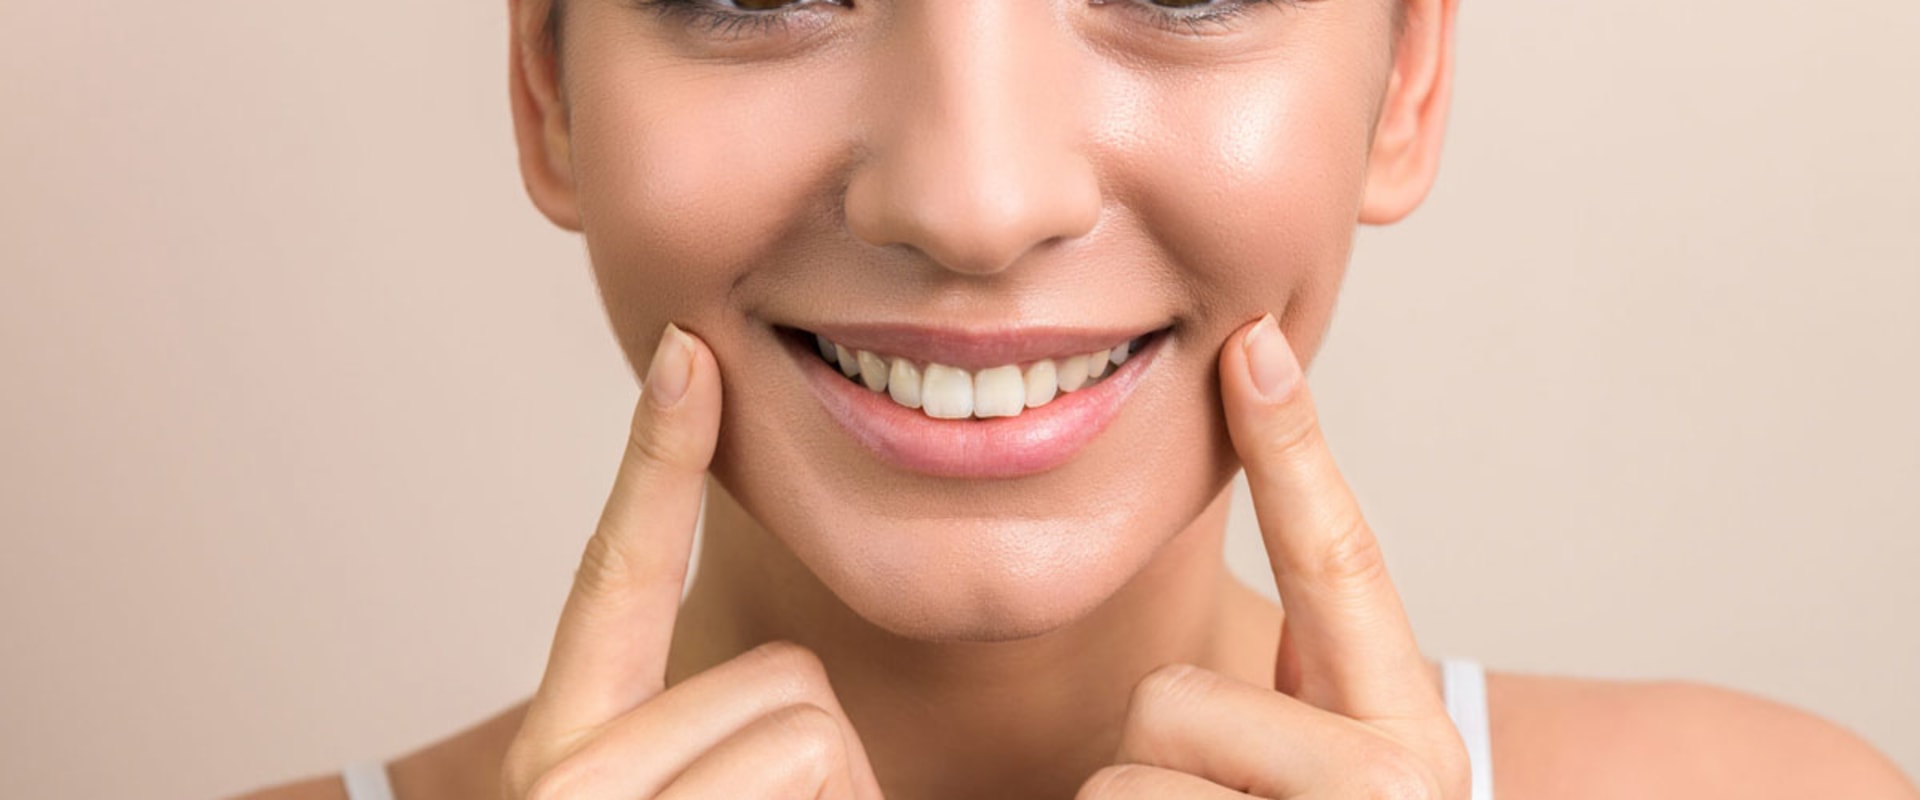 Understanding Strips and Gels Cost Breakdowns for At-Home Teeth Whitening